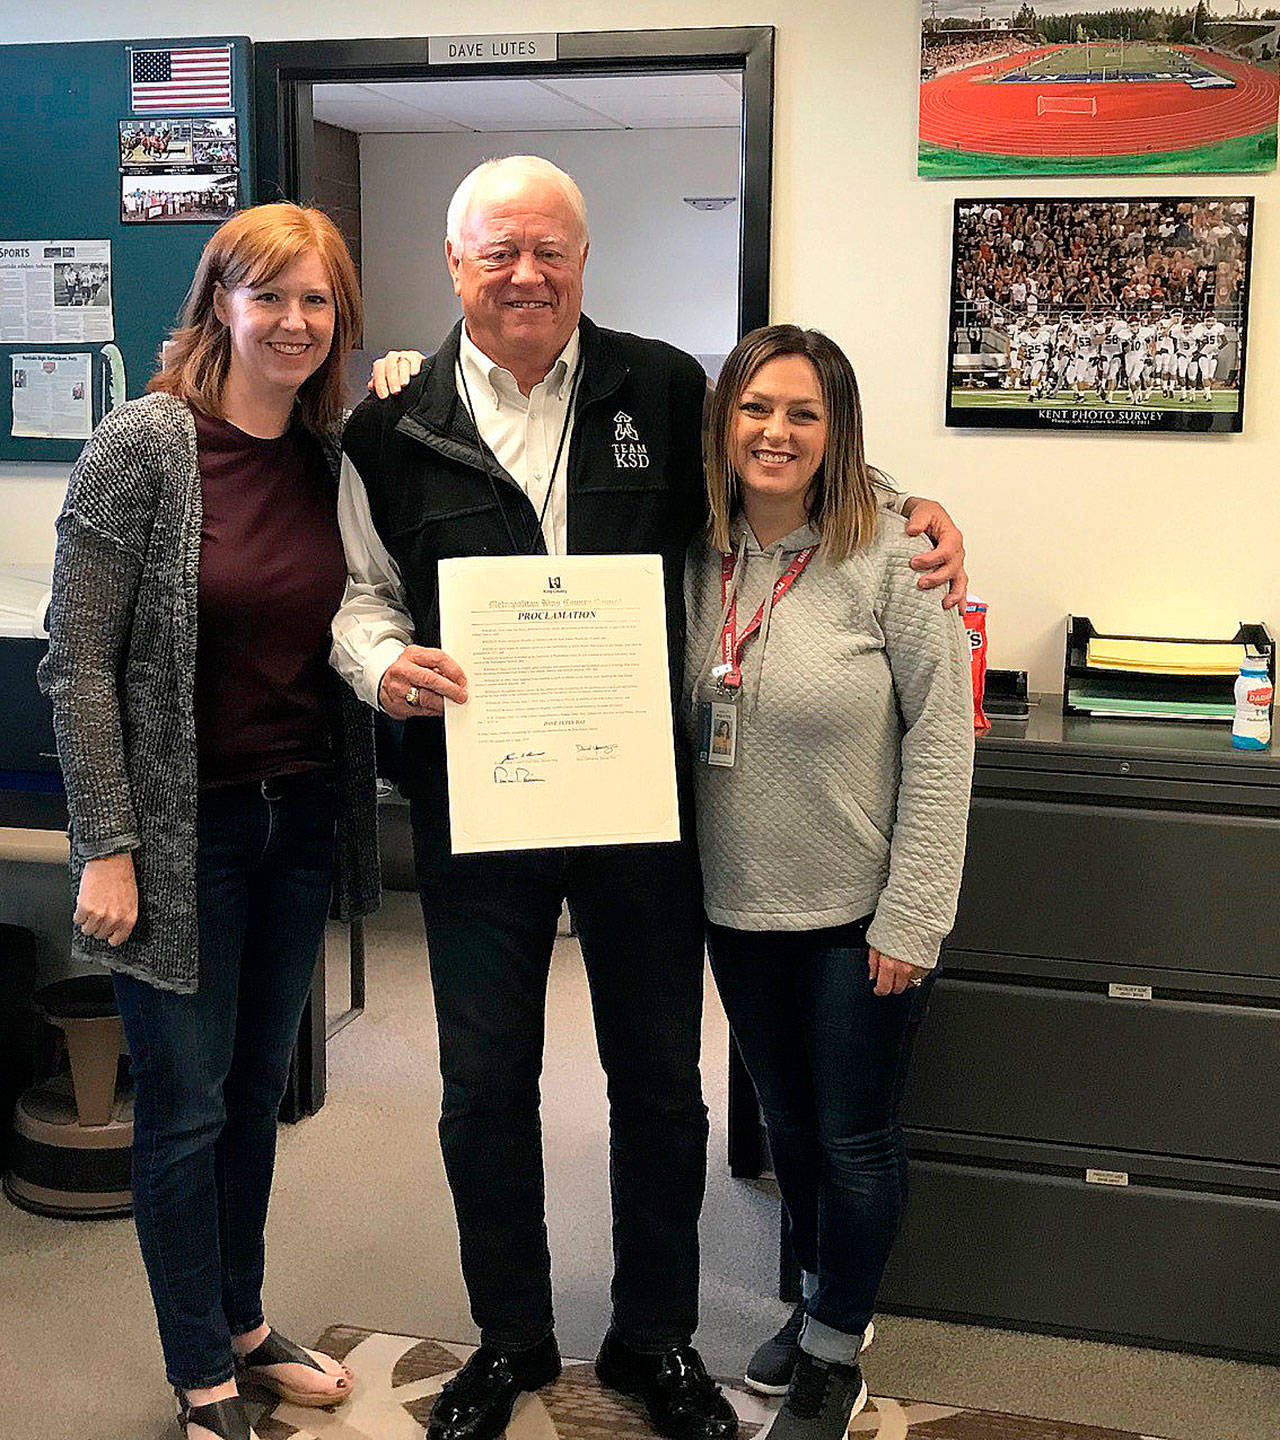 Amy Erickson, Dave Lutes and Holly Potts with the Kent School District join Lutes as he holds the proclamation from the King County Council declaring June 7 as ‘Dave Lutes Day.’ Lutes retired Friday after 42 years with the district as a teacher, coach and athletic director. COURTESY PHOTO, King County